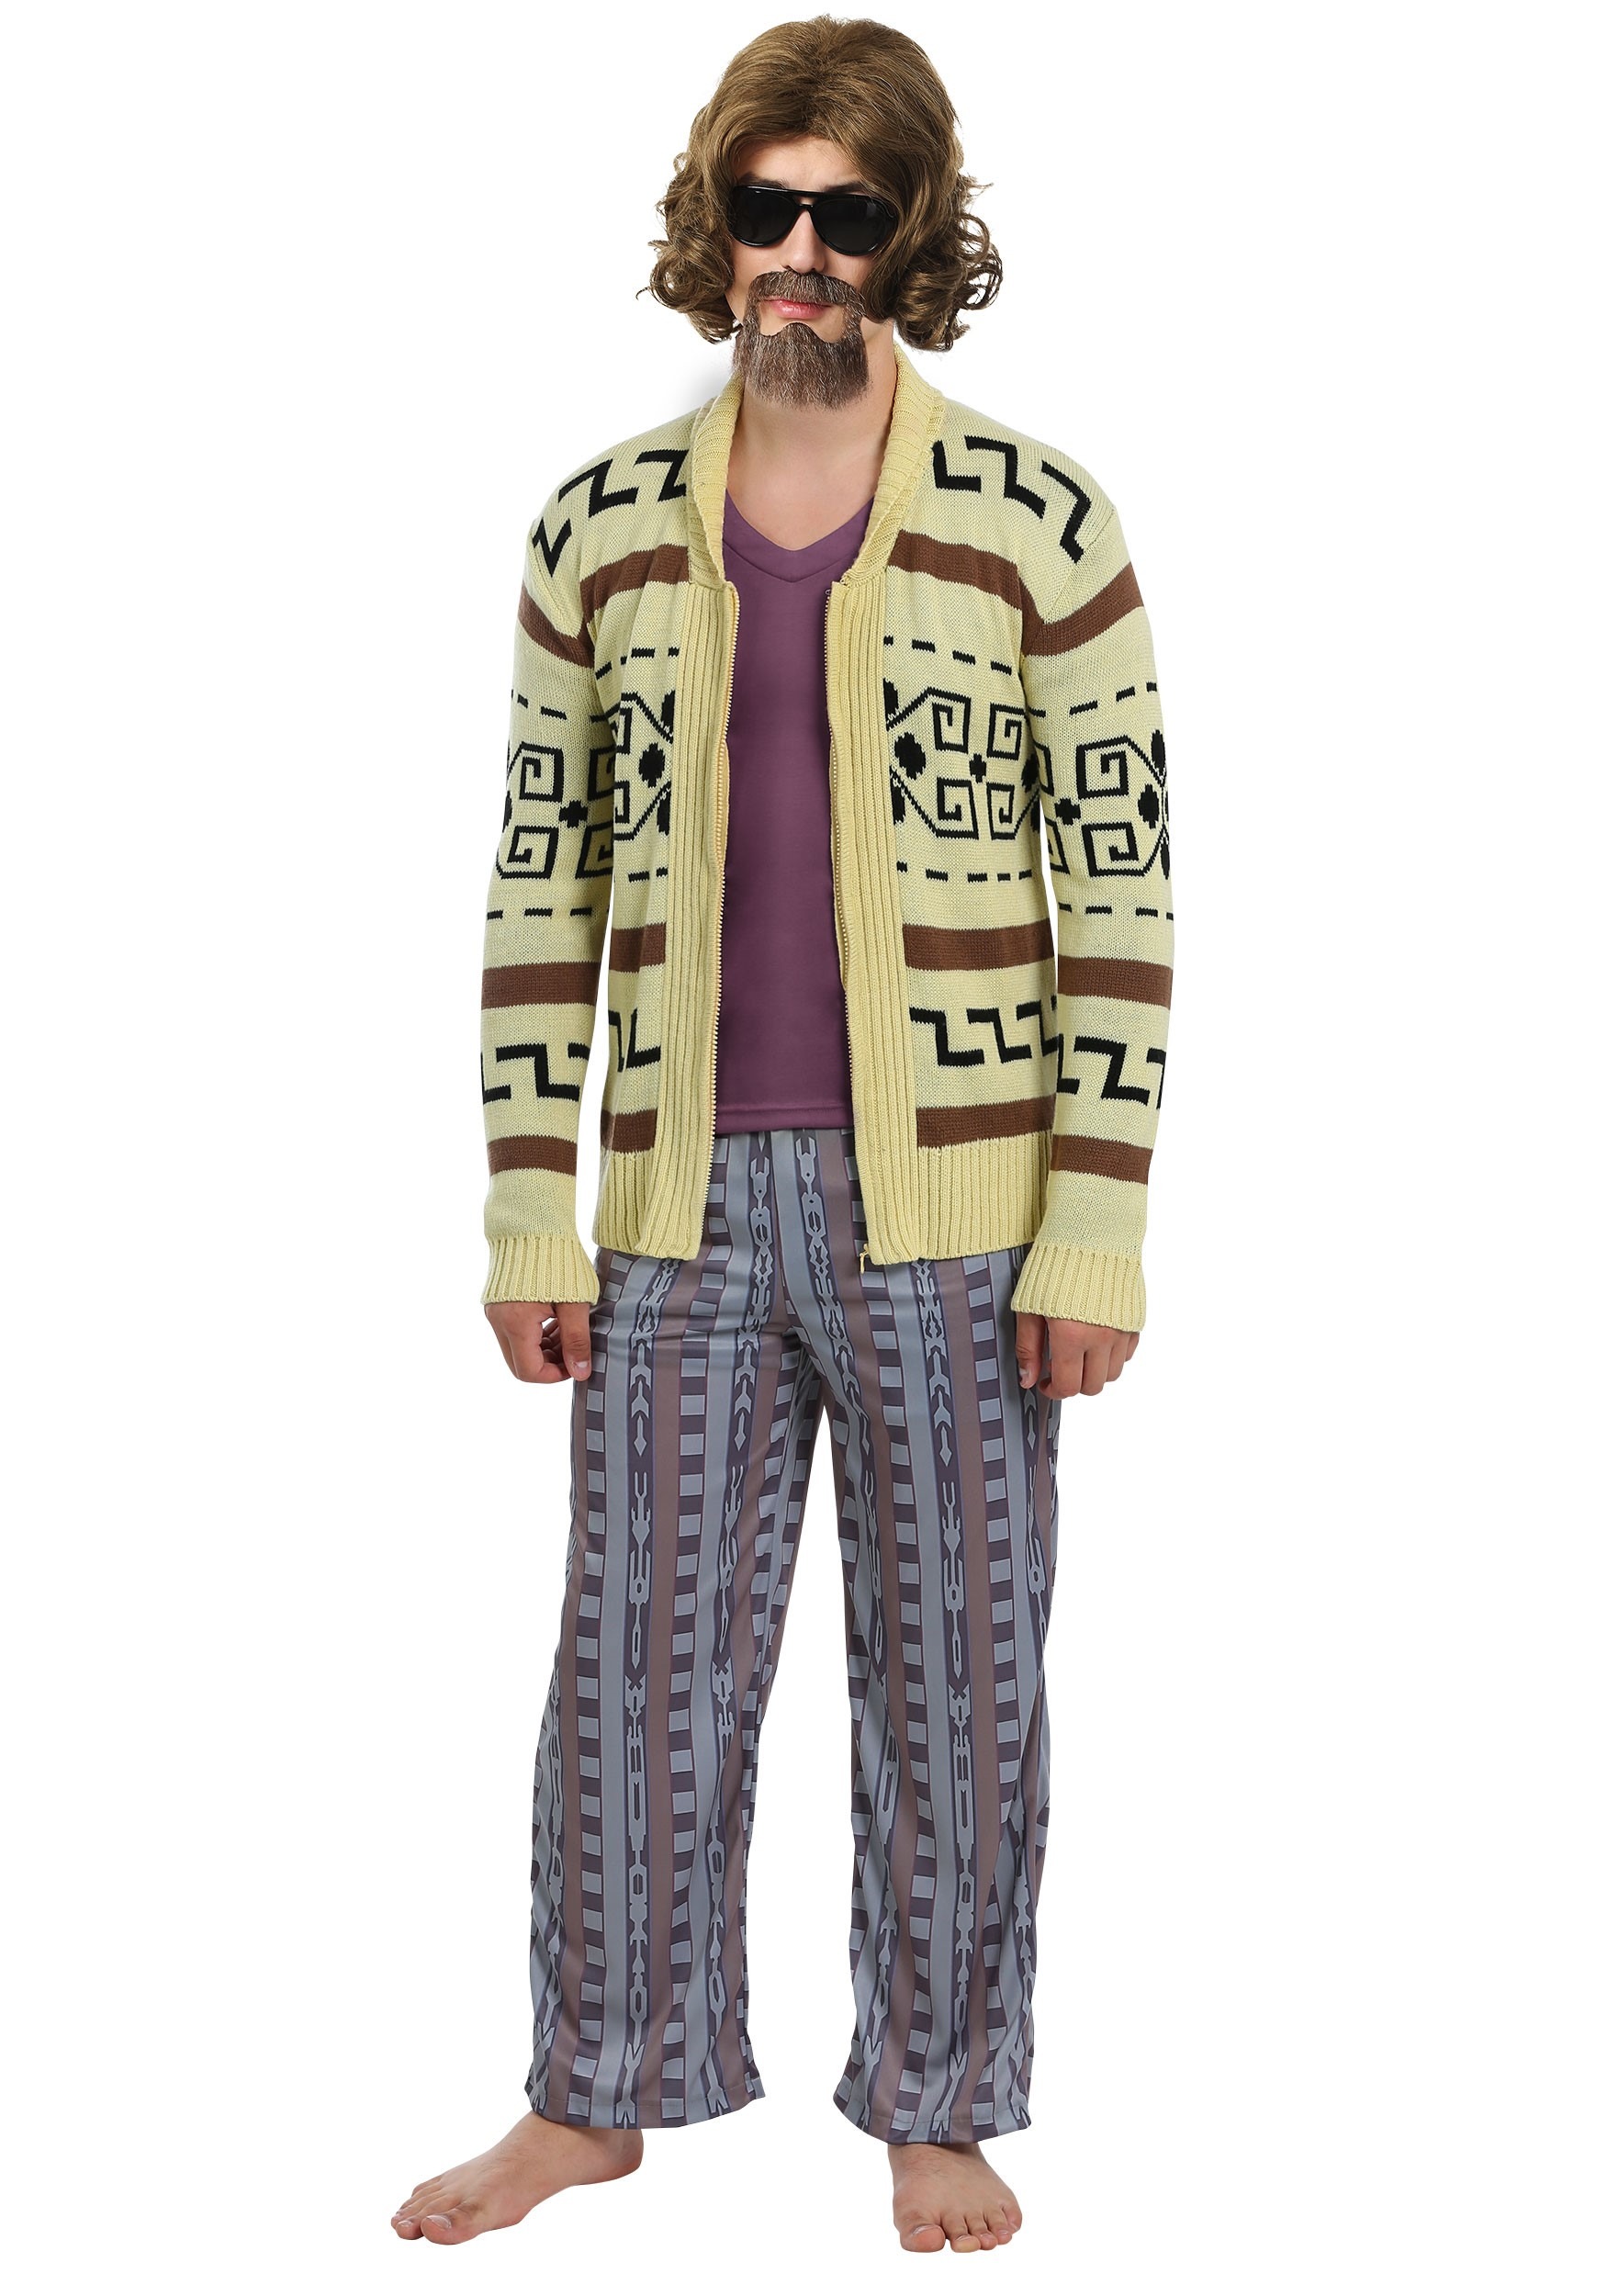 Big Lebowski The Dude Sweater Costume For Men , Movie Costumes